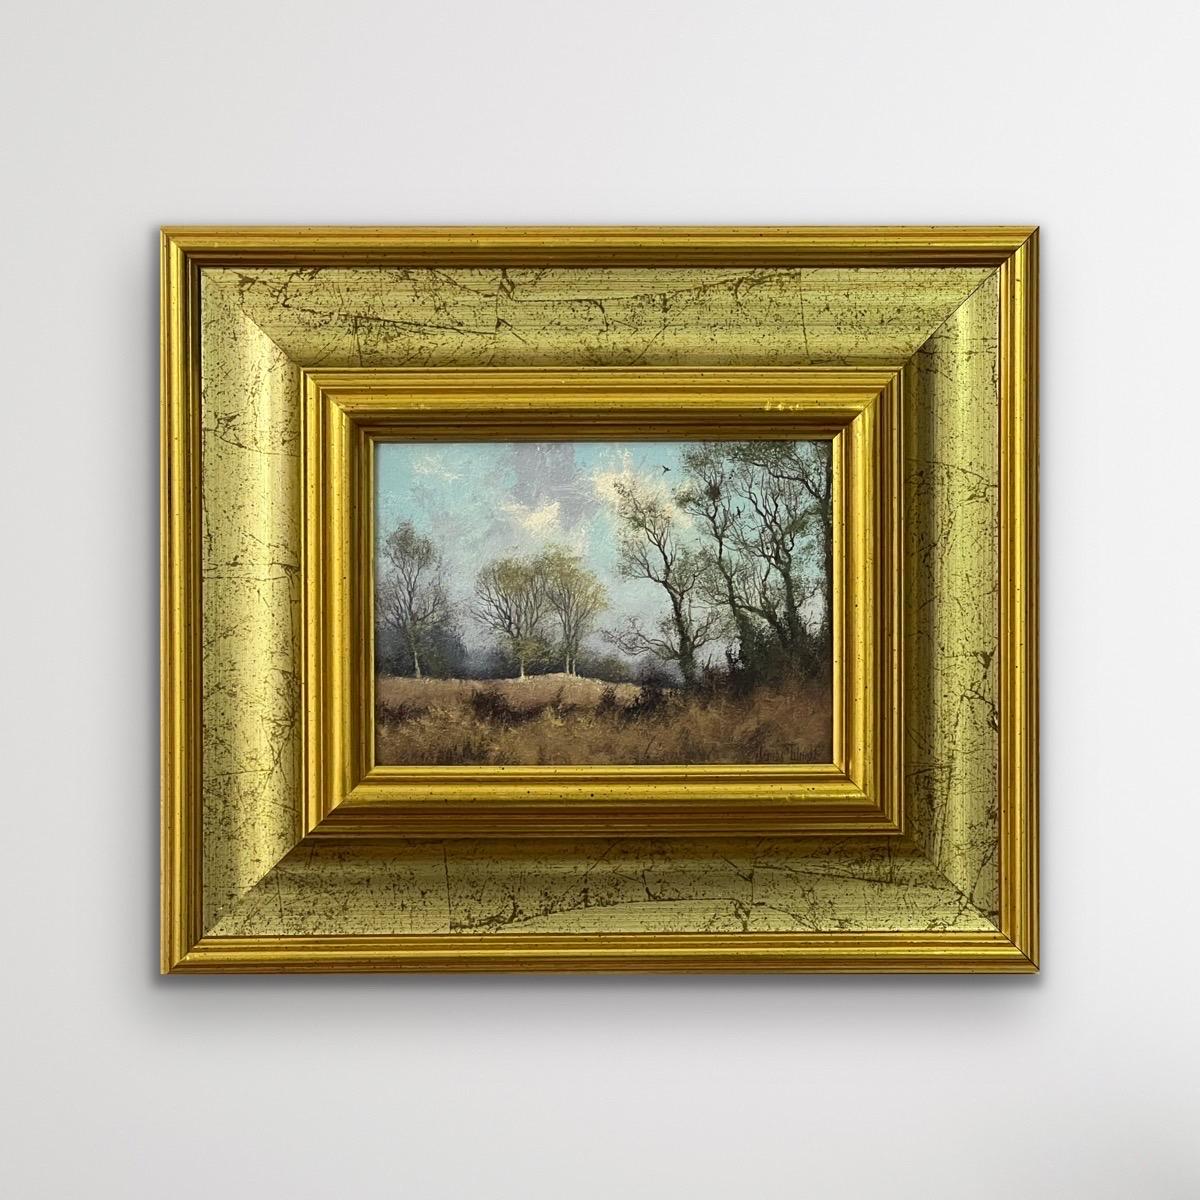 Landscape Oil Painting of Trees in the English Countryside by 20th Century Artist Countryside by 20th Century British Artist, James Wright 
Signed, Original, Oil on Canvas, housed in a beautiful ornate gold frame. 

Art measures 7 x 5 inches